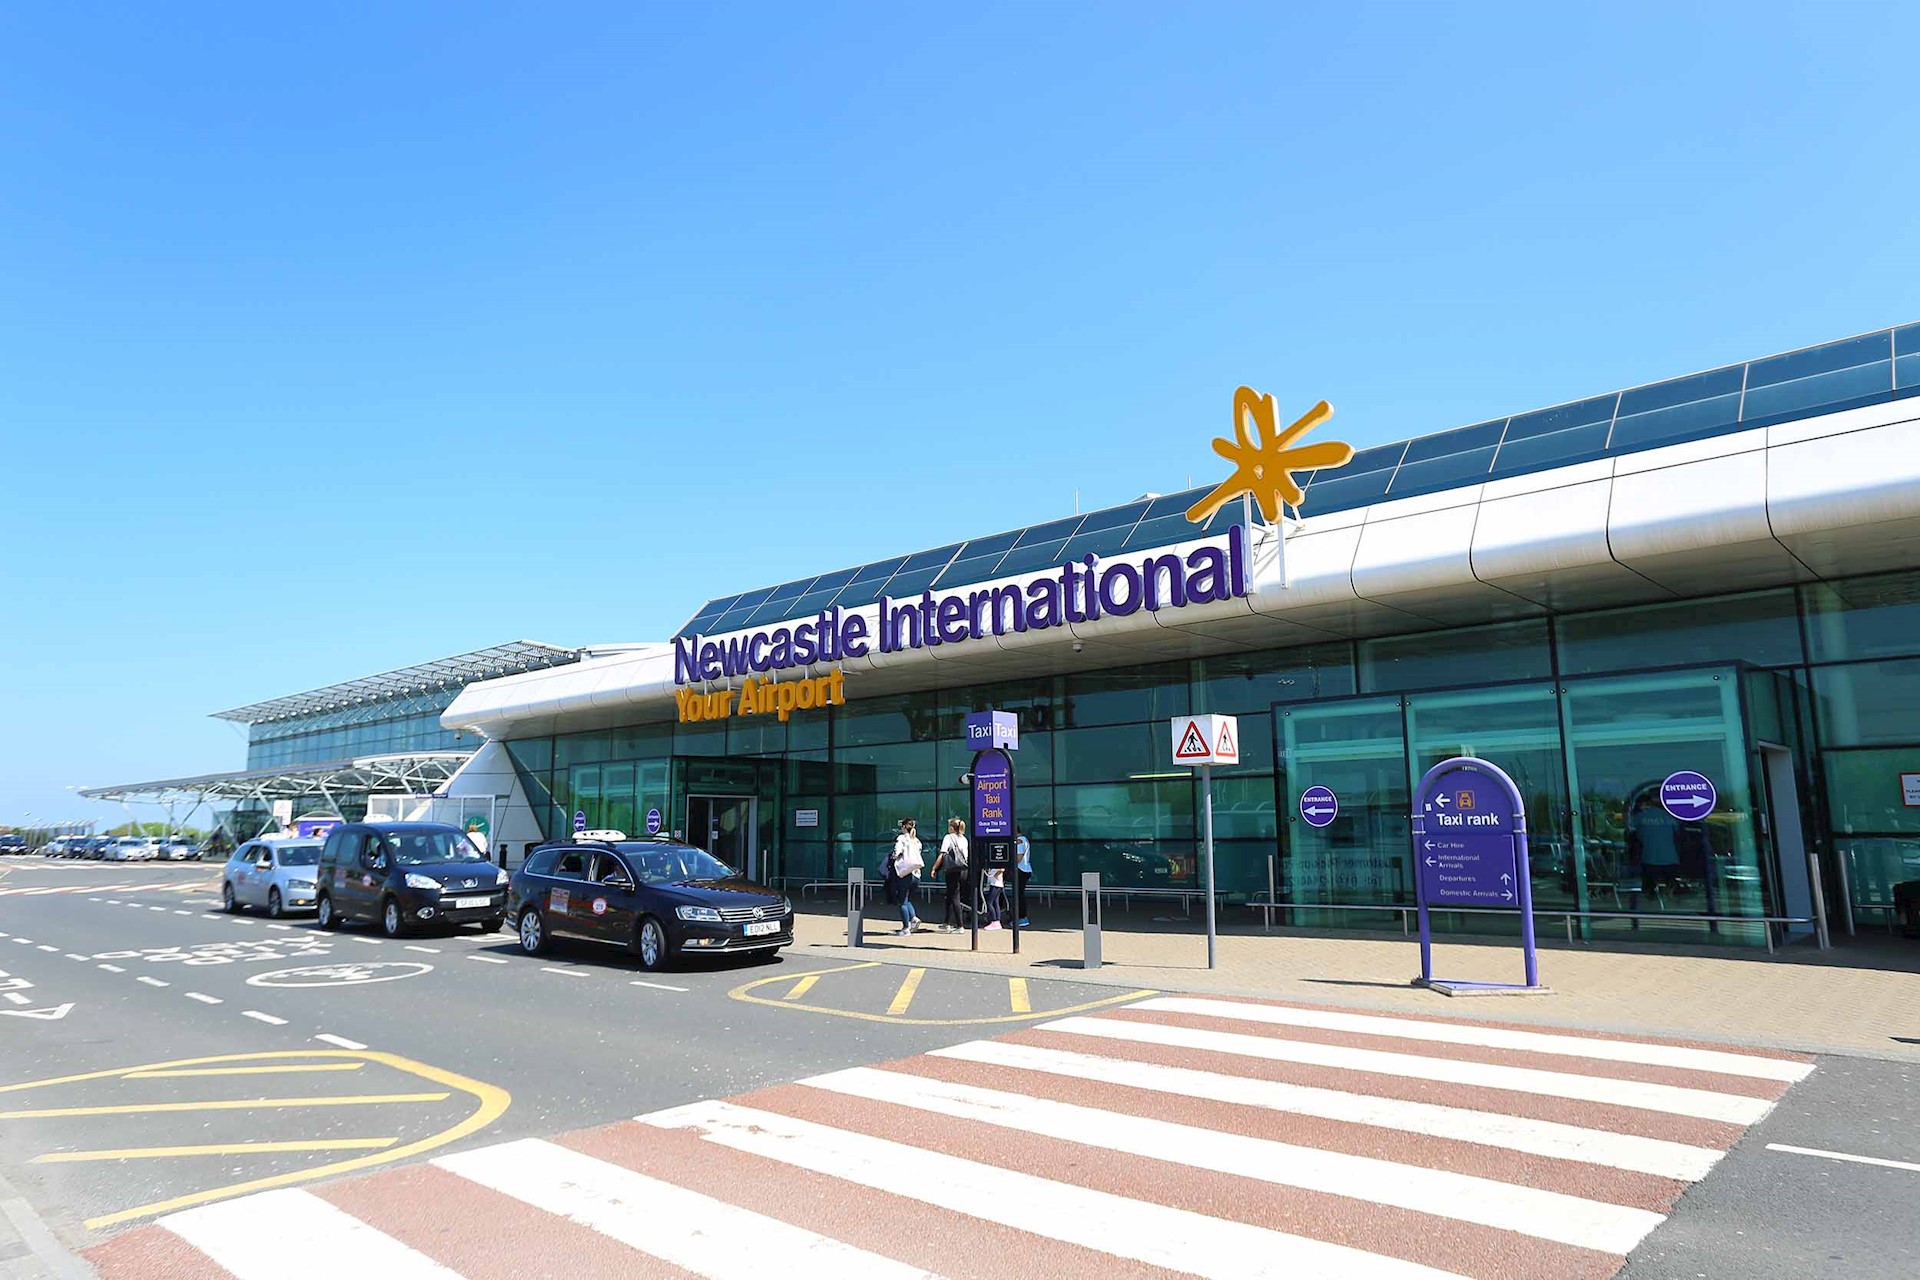 ncl-airport-terminal-front_web